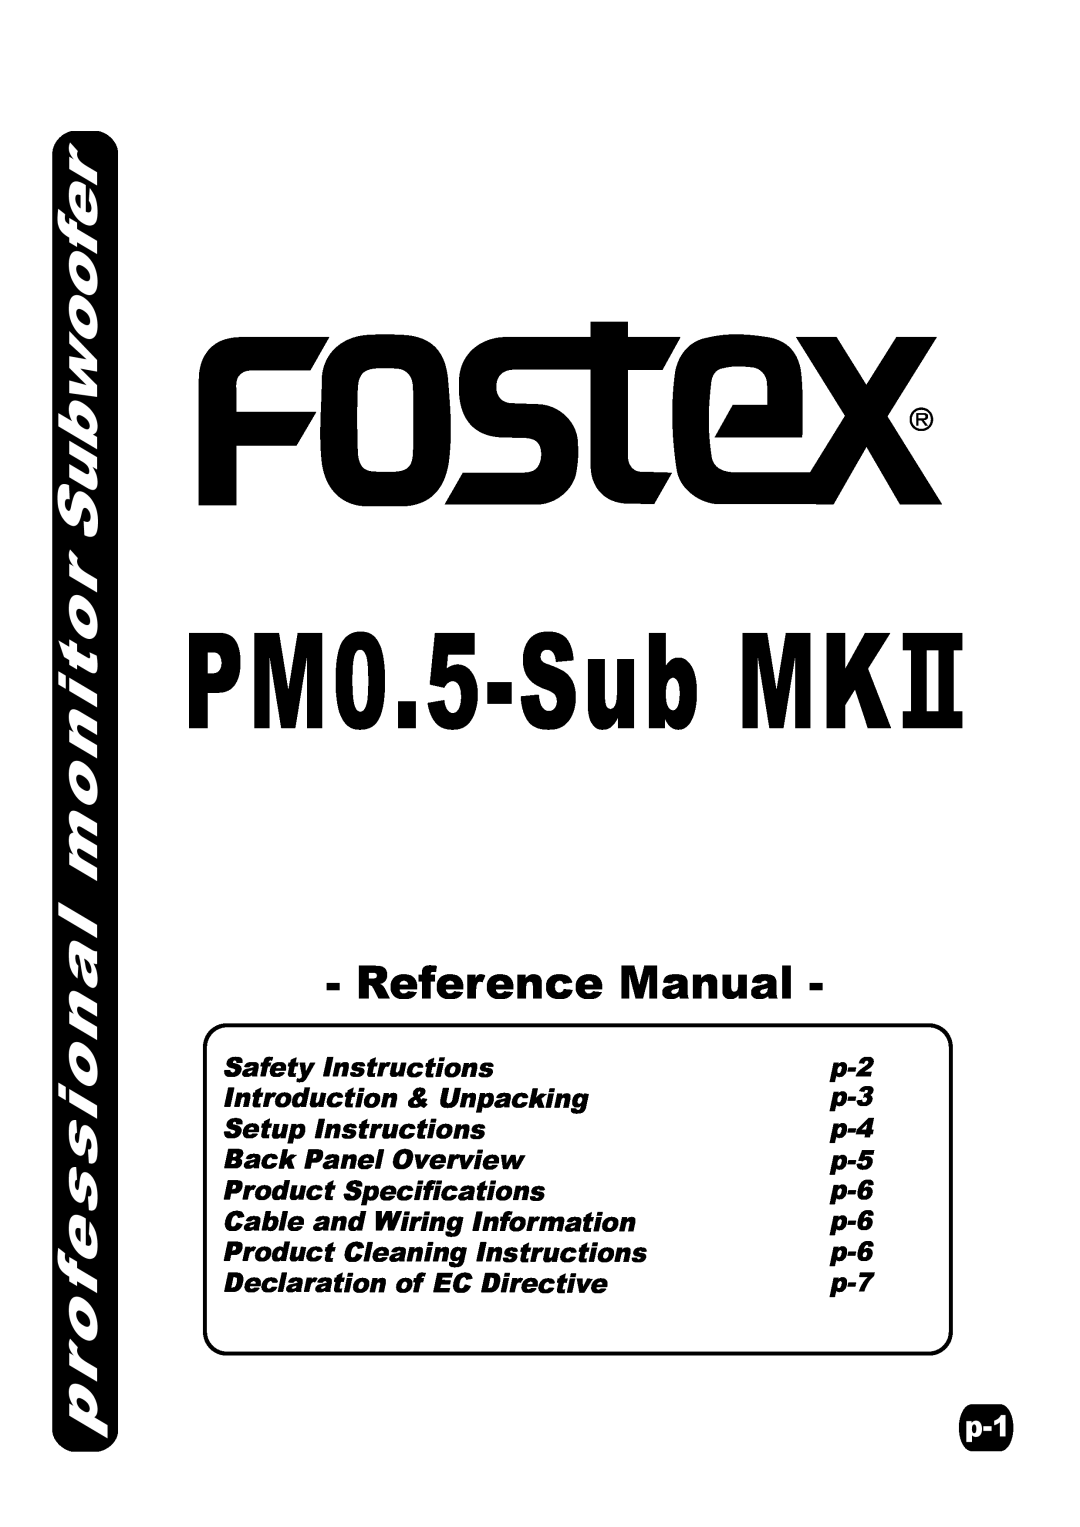 Fostex Speaker specifications PM0.5-SubMK, professional monitor Subwoofer, Reference Manual, Safety Instructions 